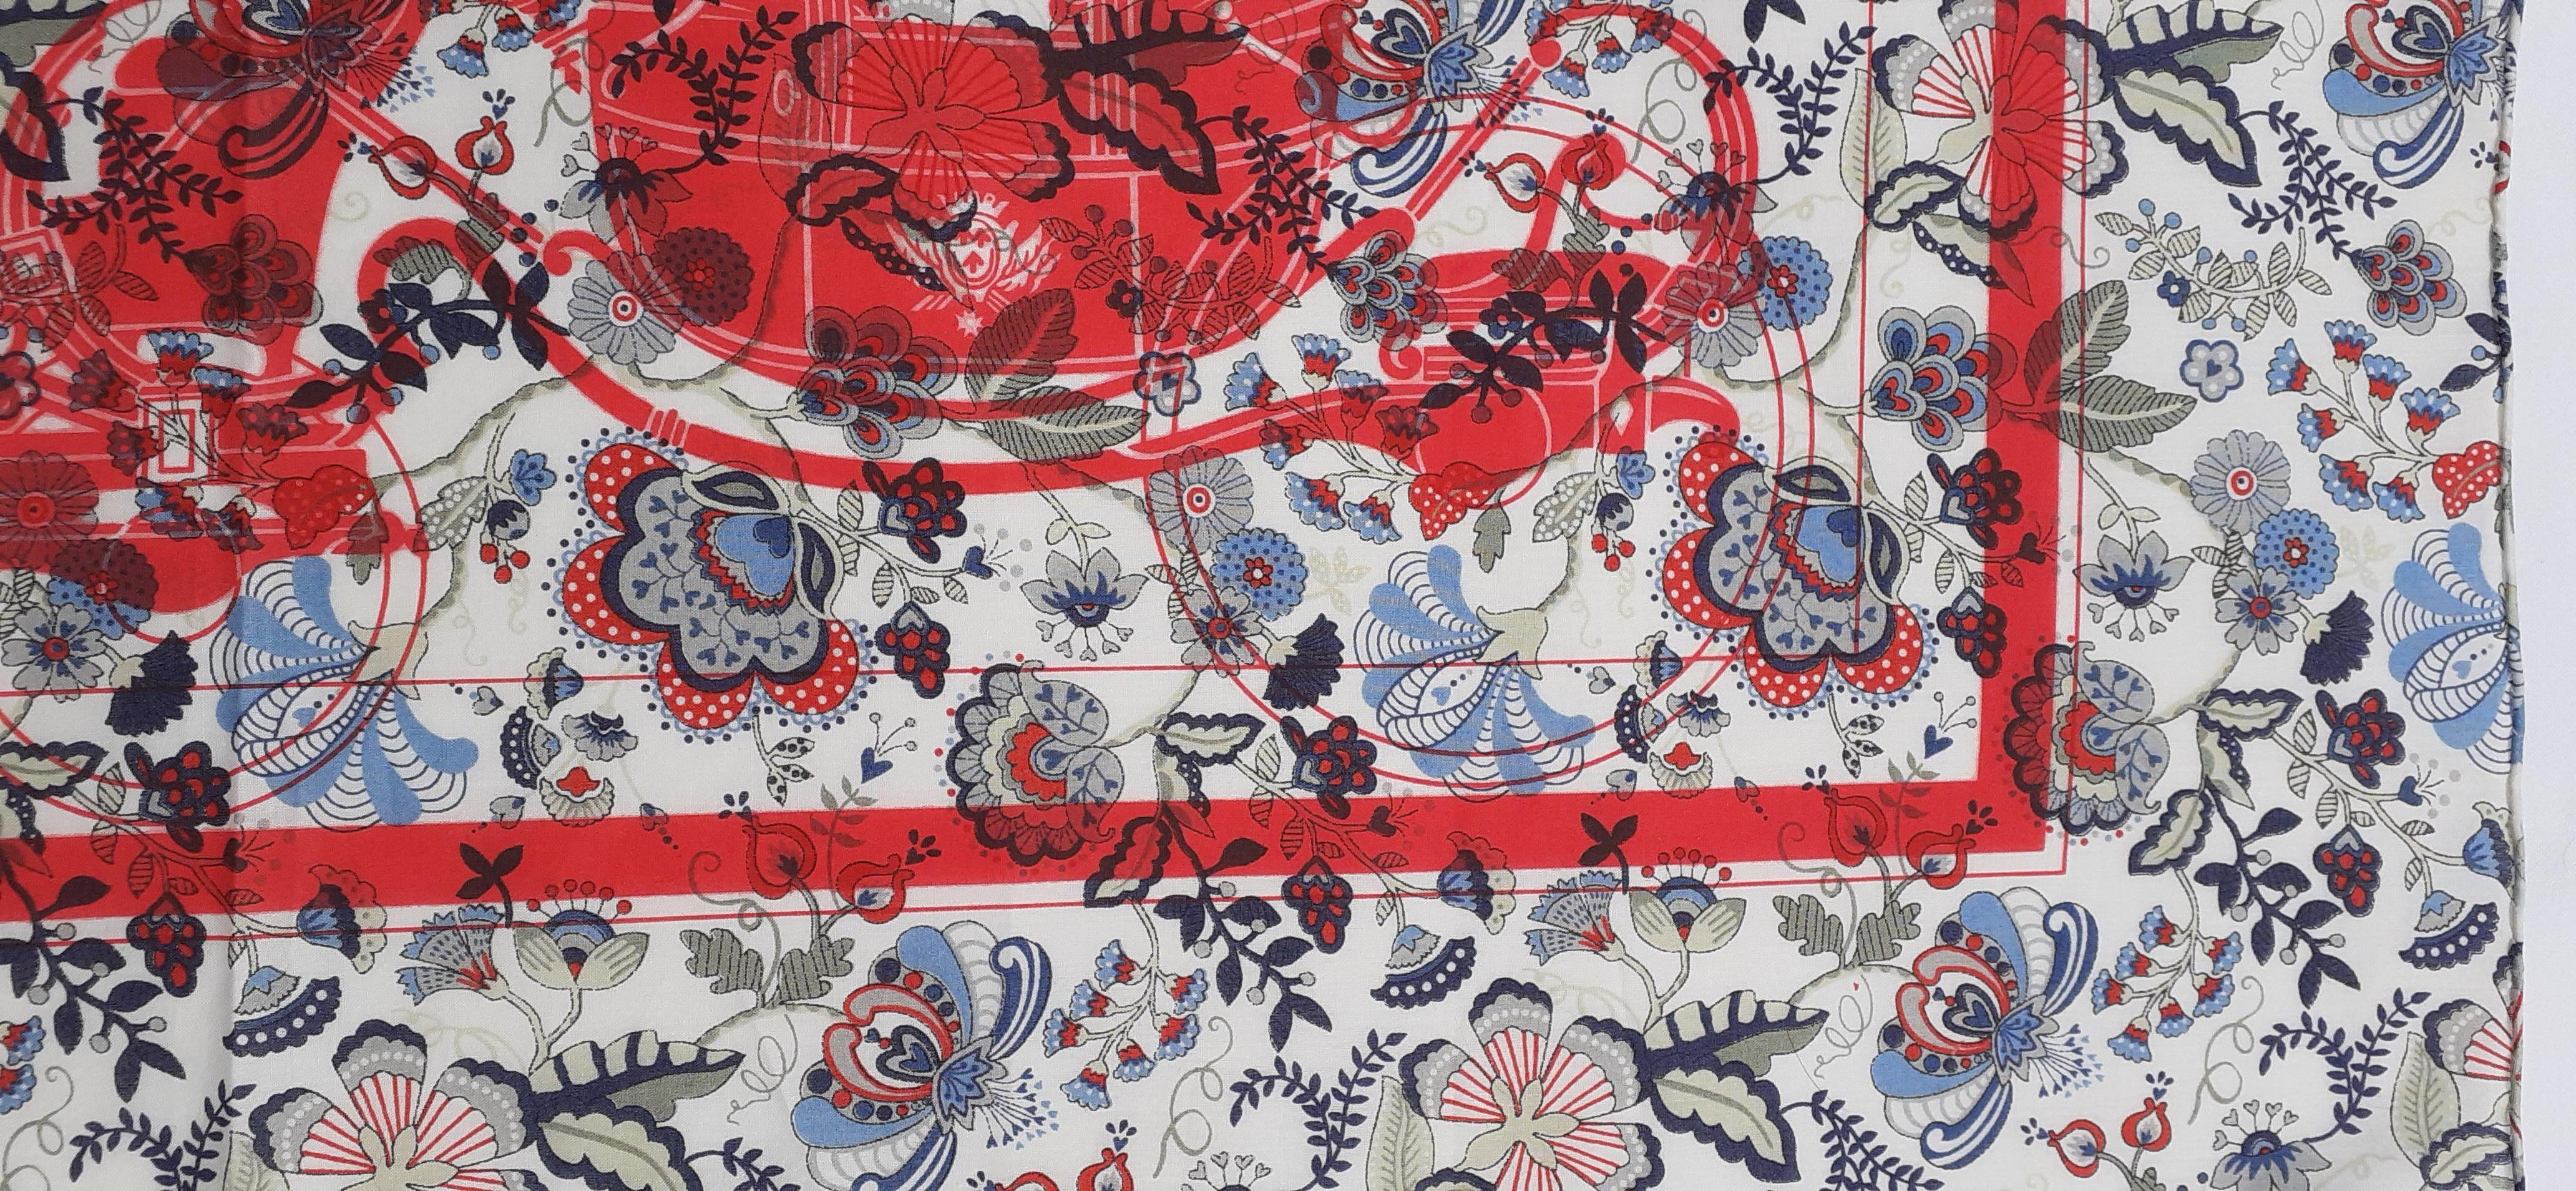 Women's Hermès For Liberty Cotton Scarf Ex Libris and Flowers 26' Limited Edition